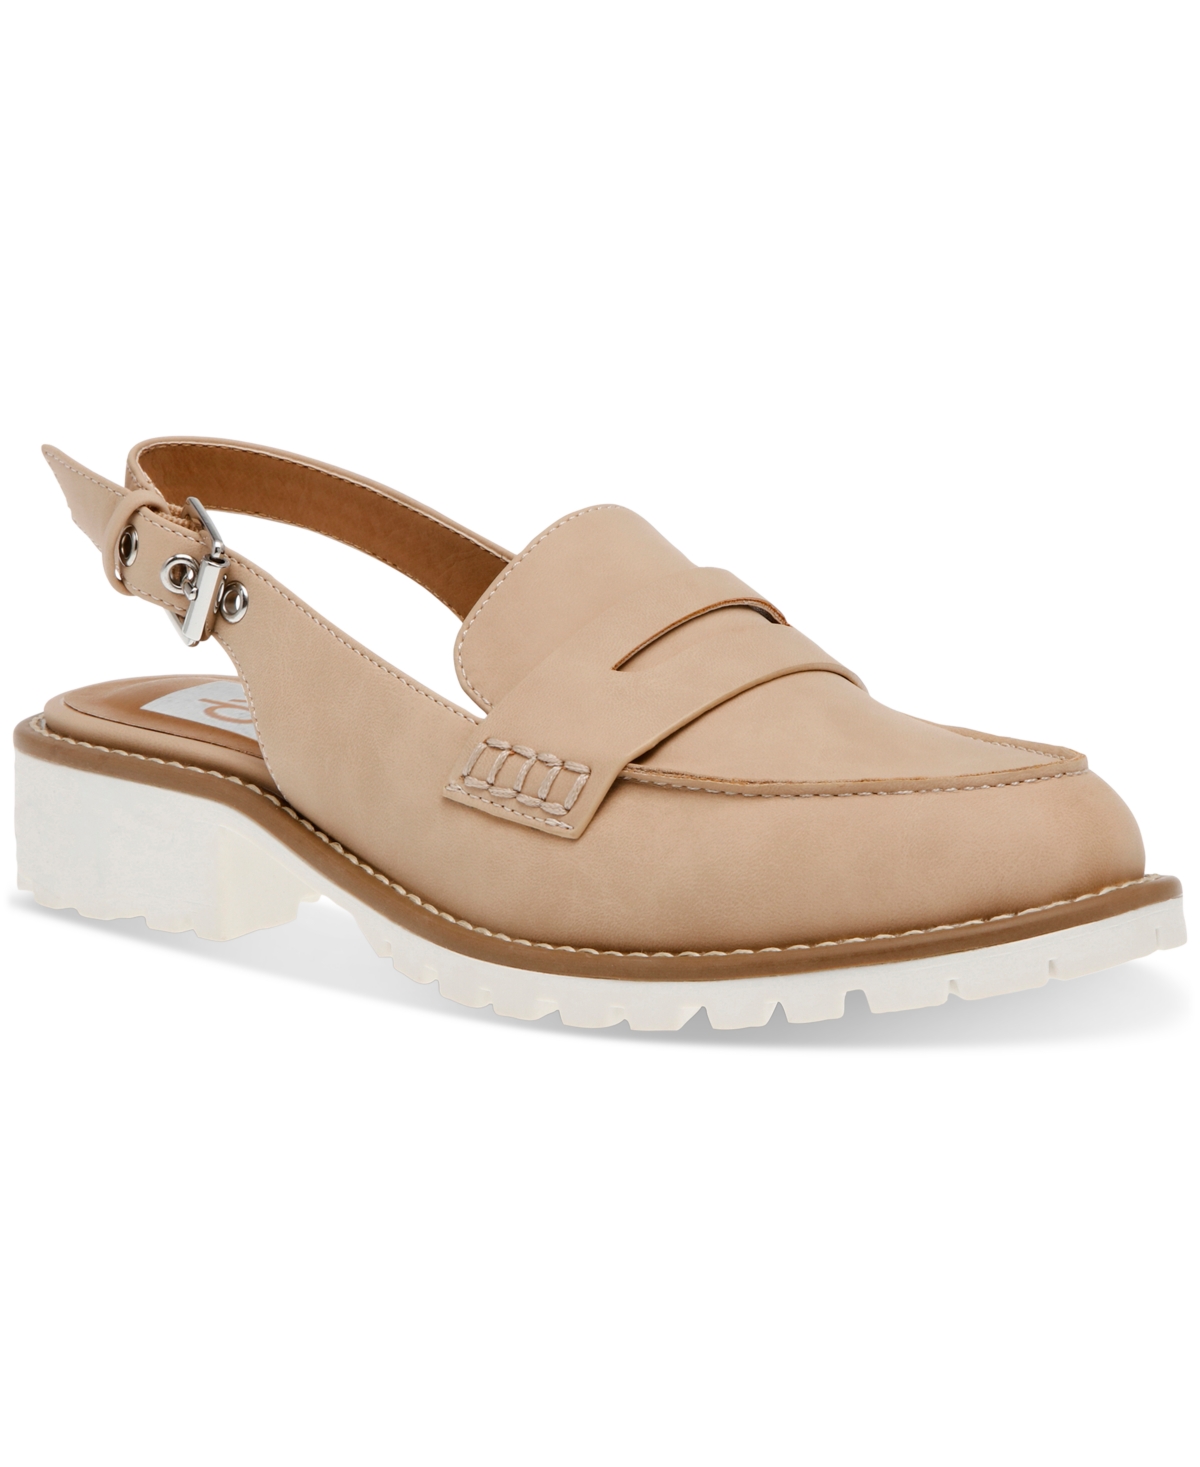 Women's Cabo Slingback Tailored Loafers - Tan